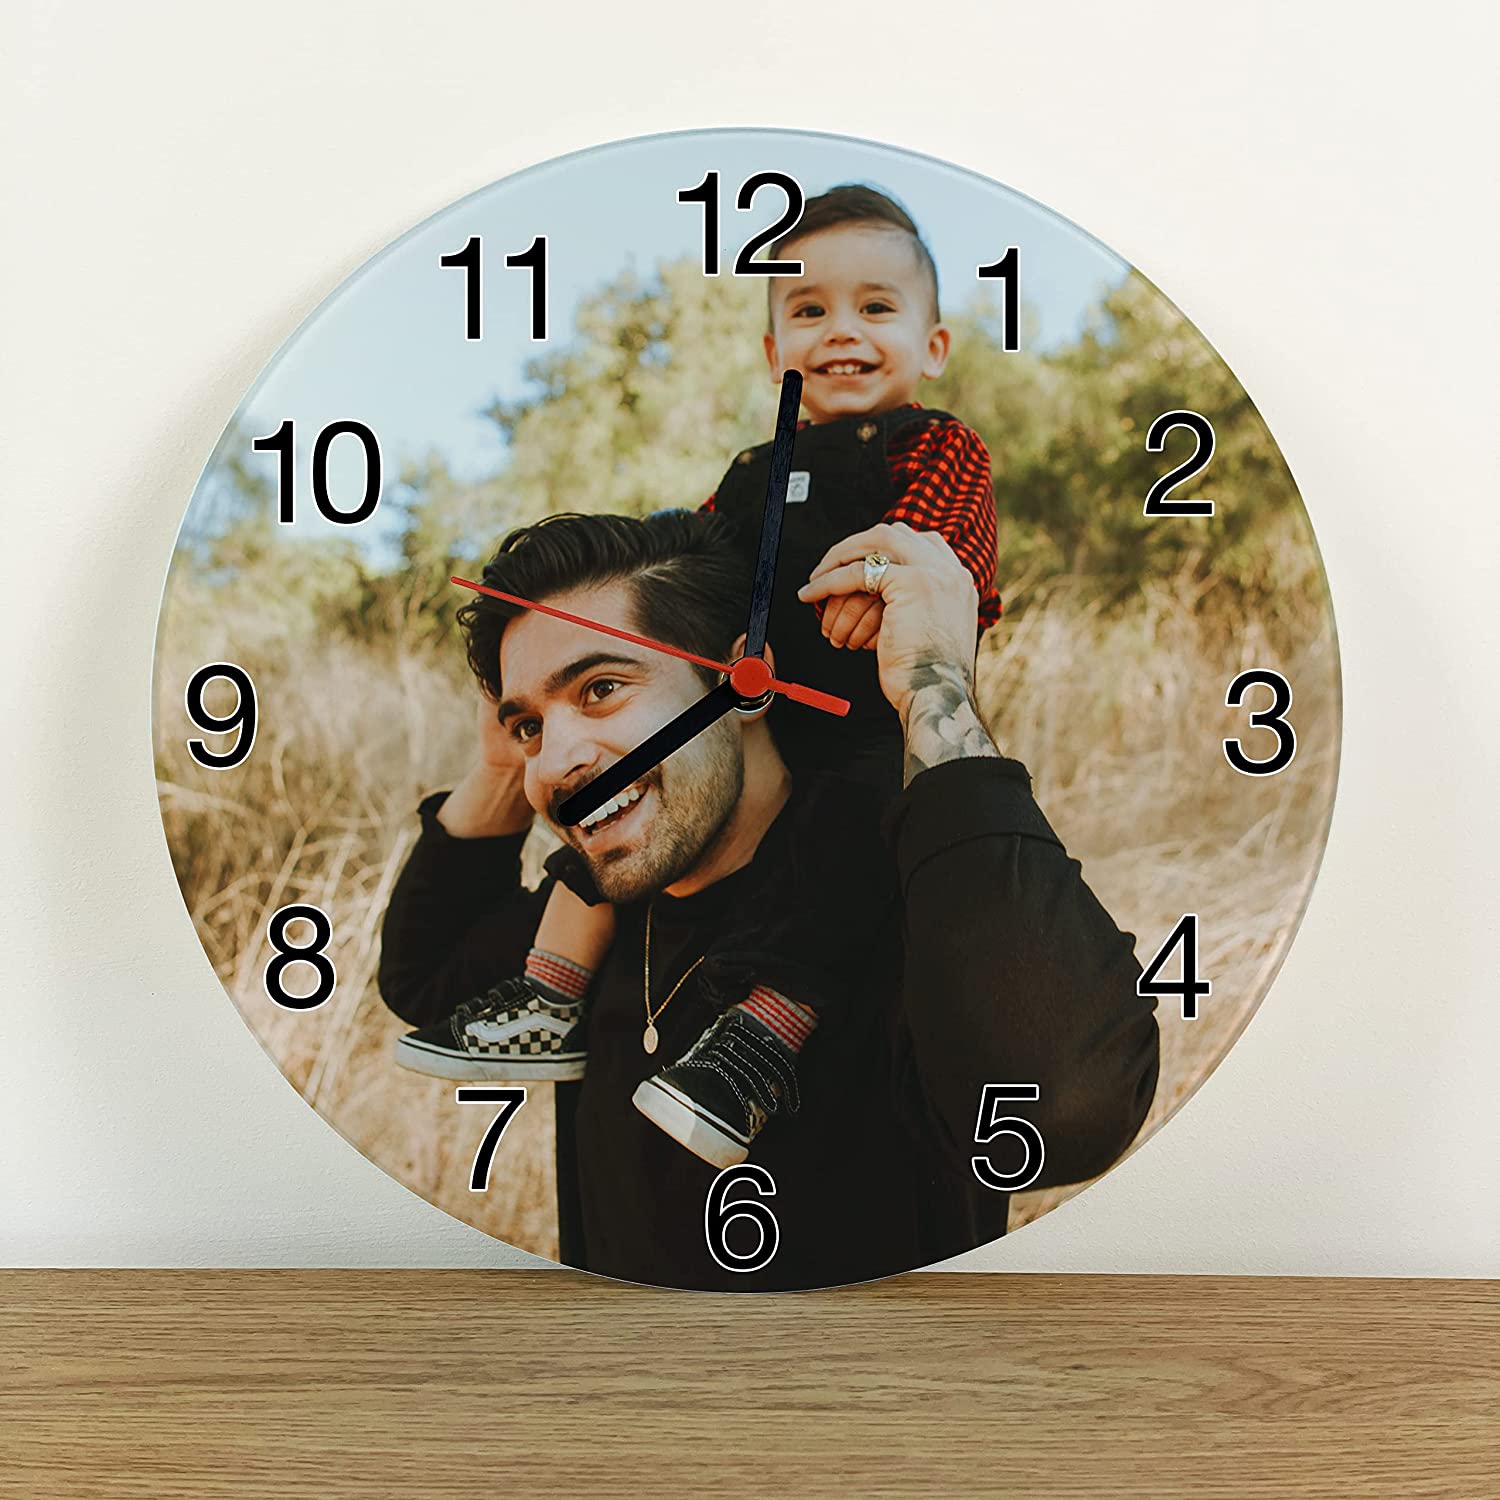 Personalised Clock, 18 cm Glass Round, Black/Red Plastic Hands